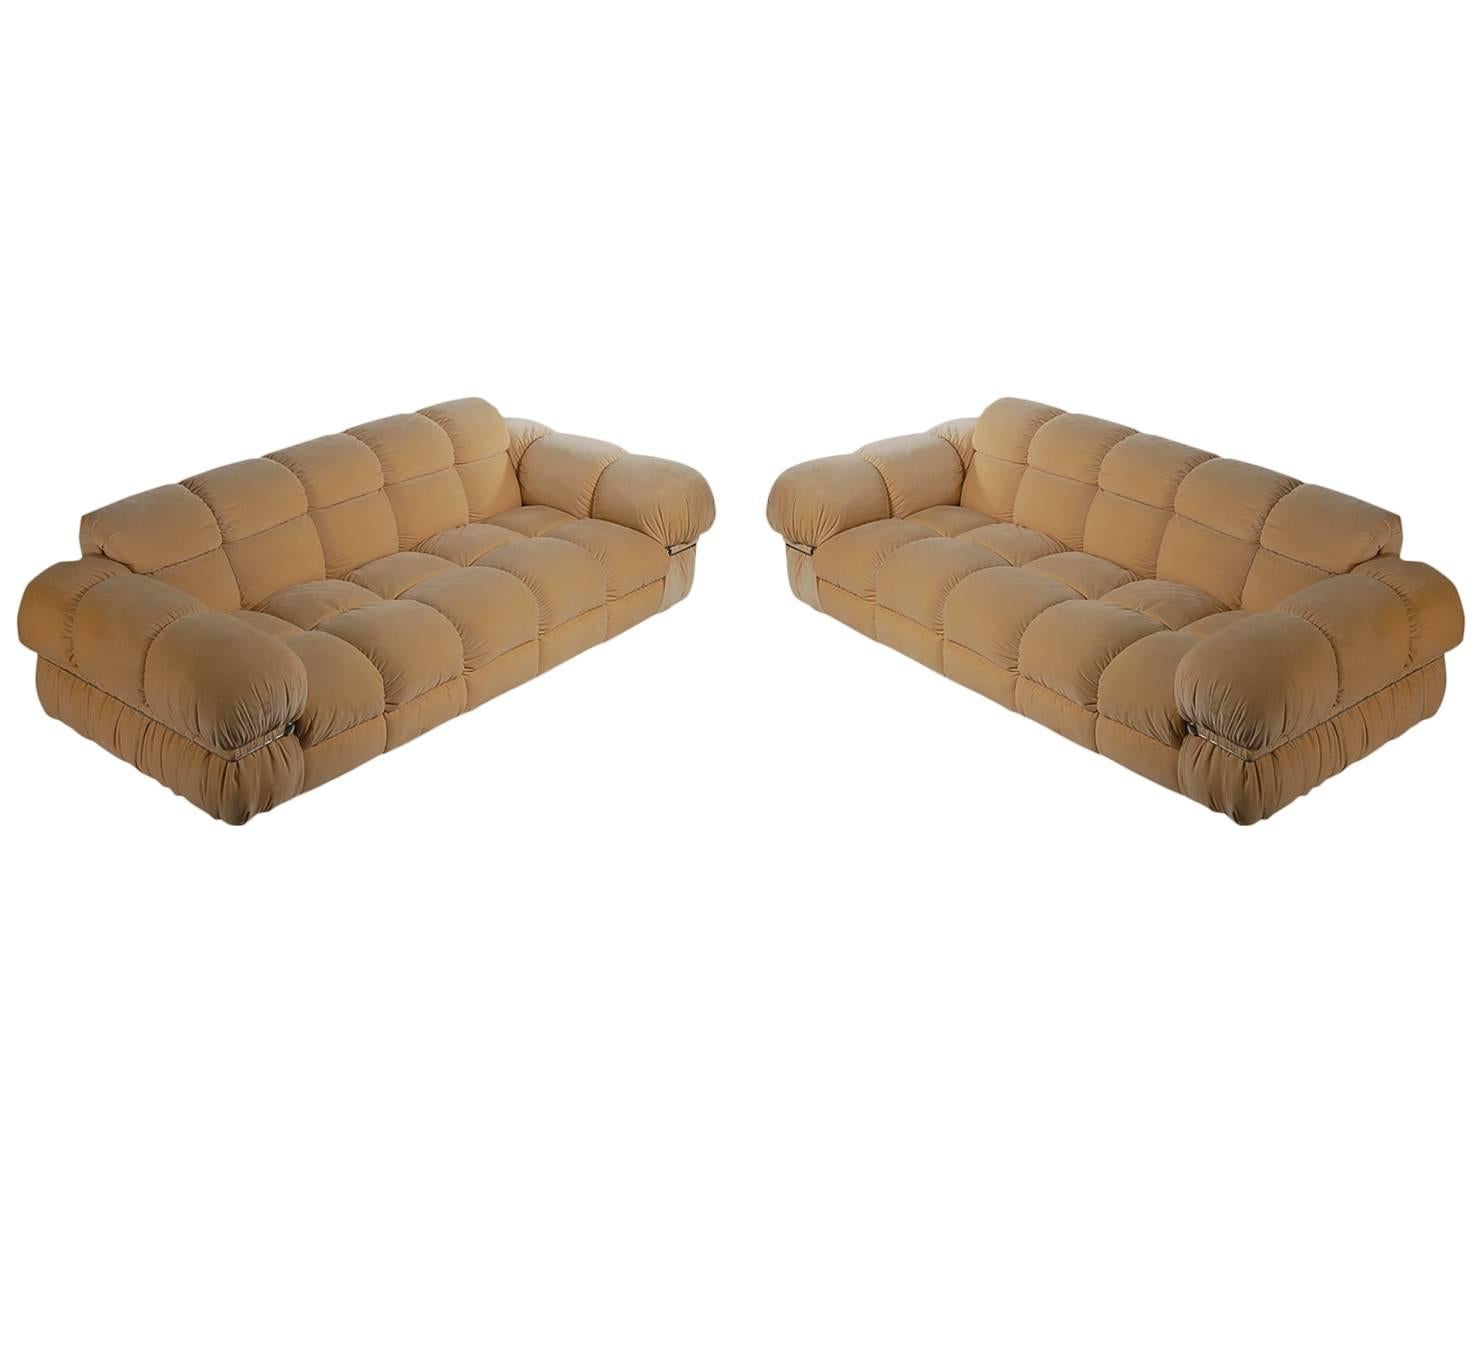 A very handsome matching pair of Italian sofas in the style of Mario Bellini's Camaleonda design. They feature, highly tailored upholstery, small casters feet, done in a cream colored microfiber. Very clean original condition.